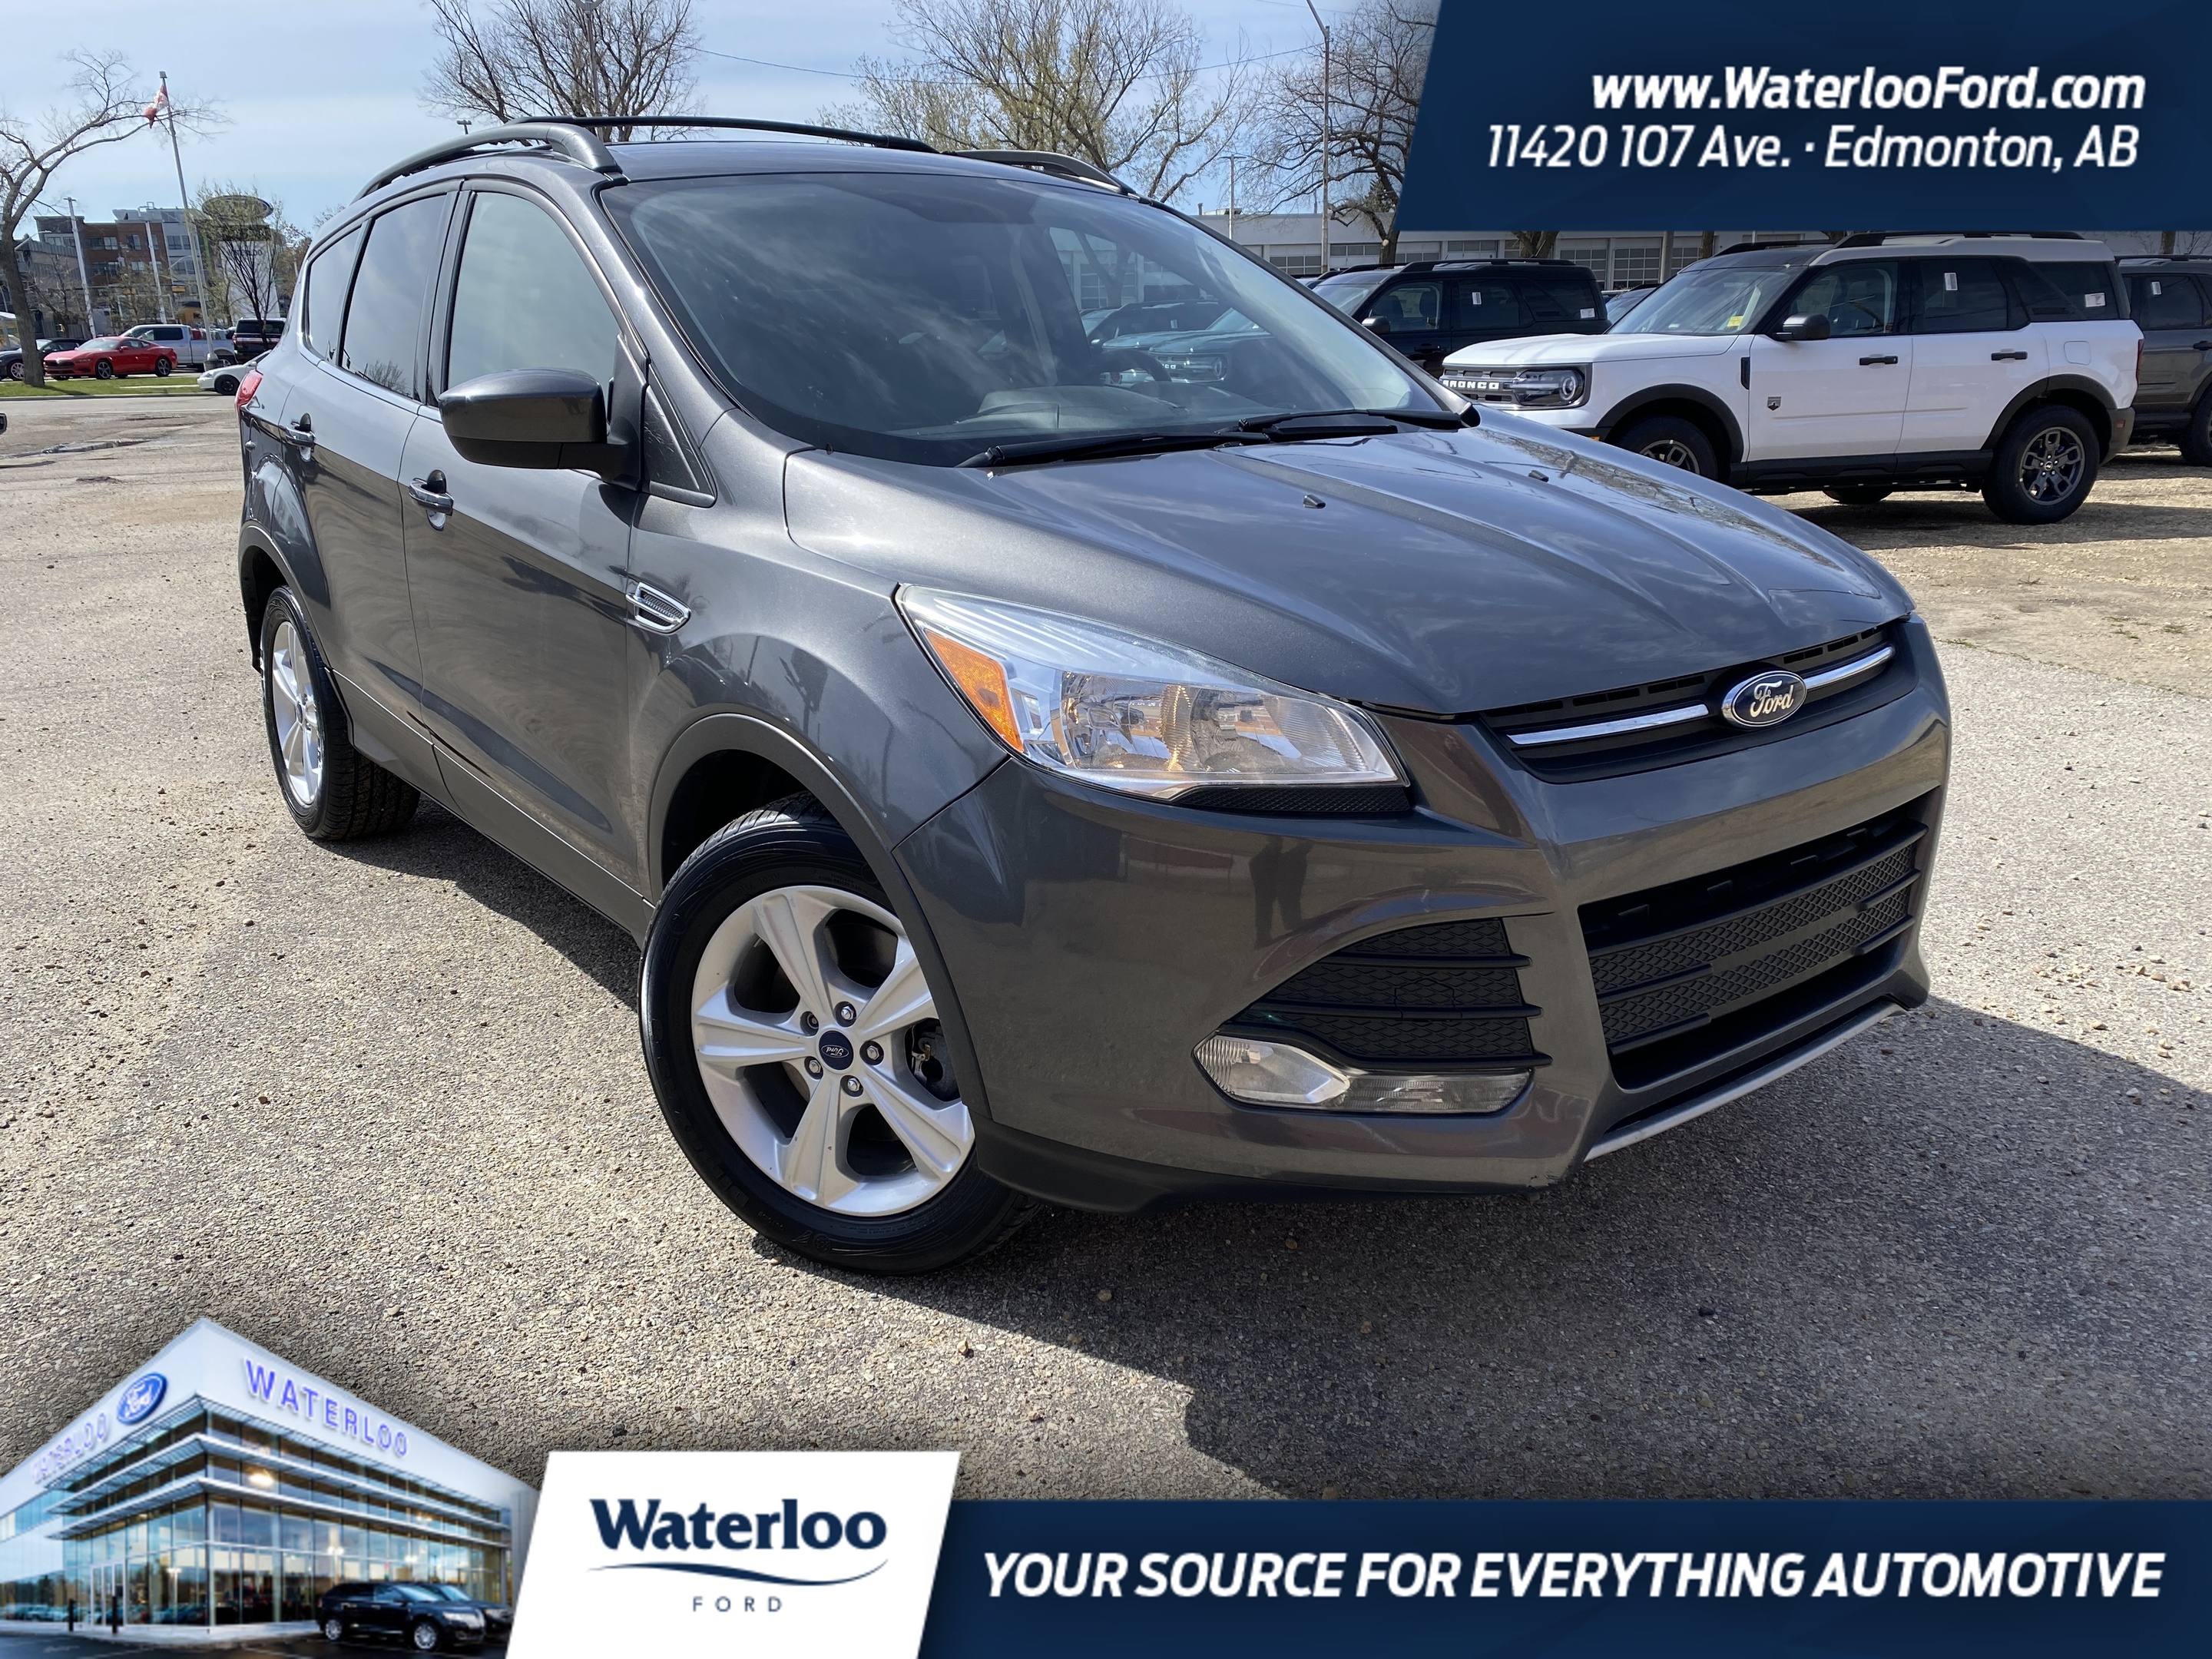 2016 Ford Escape SE | Power Liftgate | Heated Seats | Keyless Entry